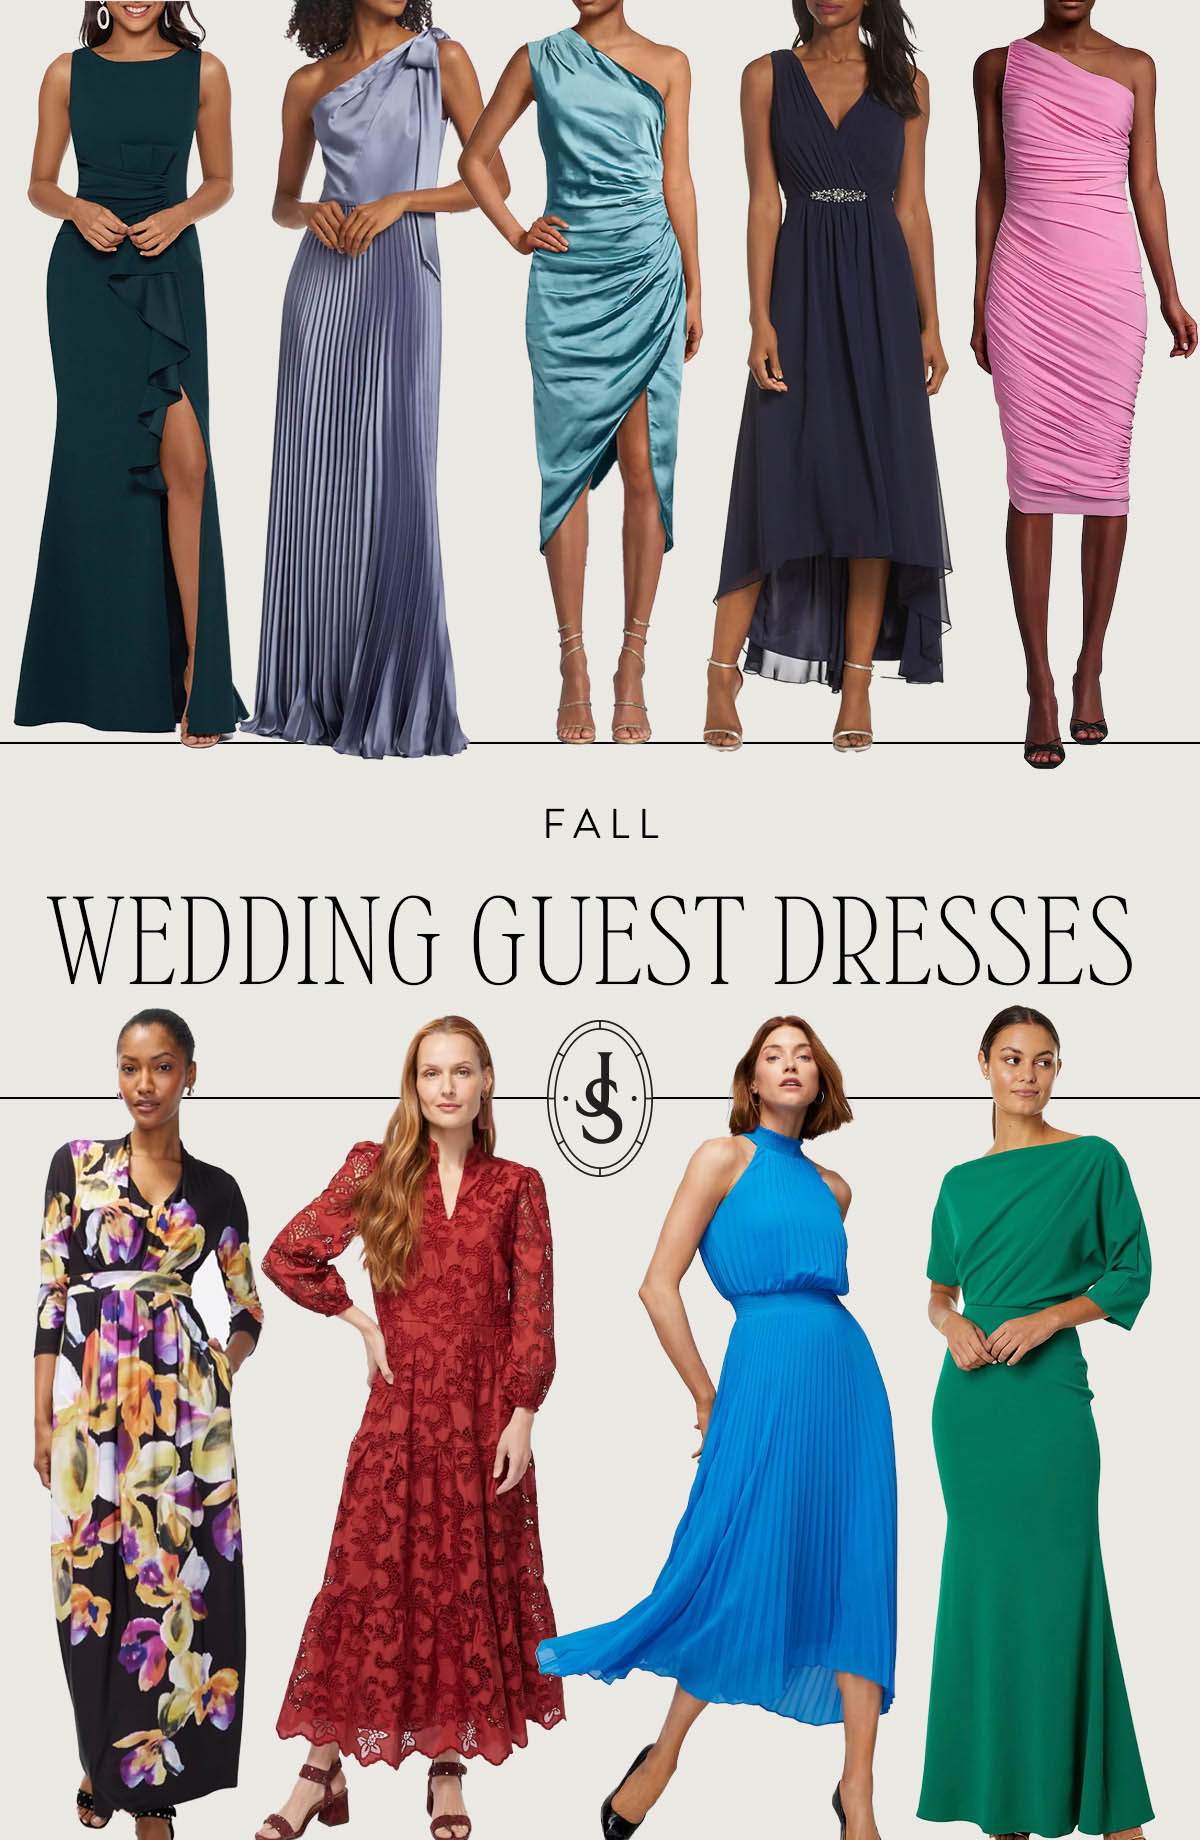 What to Wear to a Fall Wedding Based on Style & Etiquette